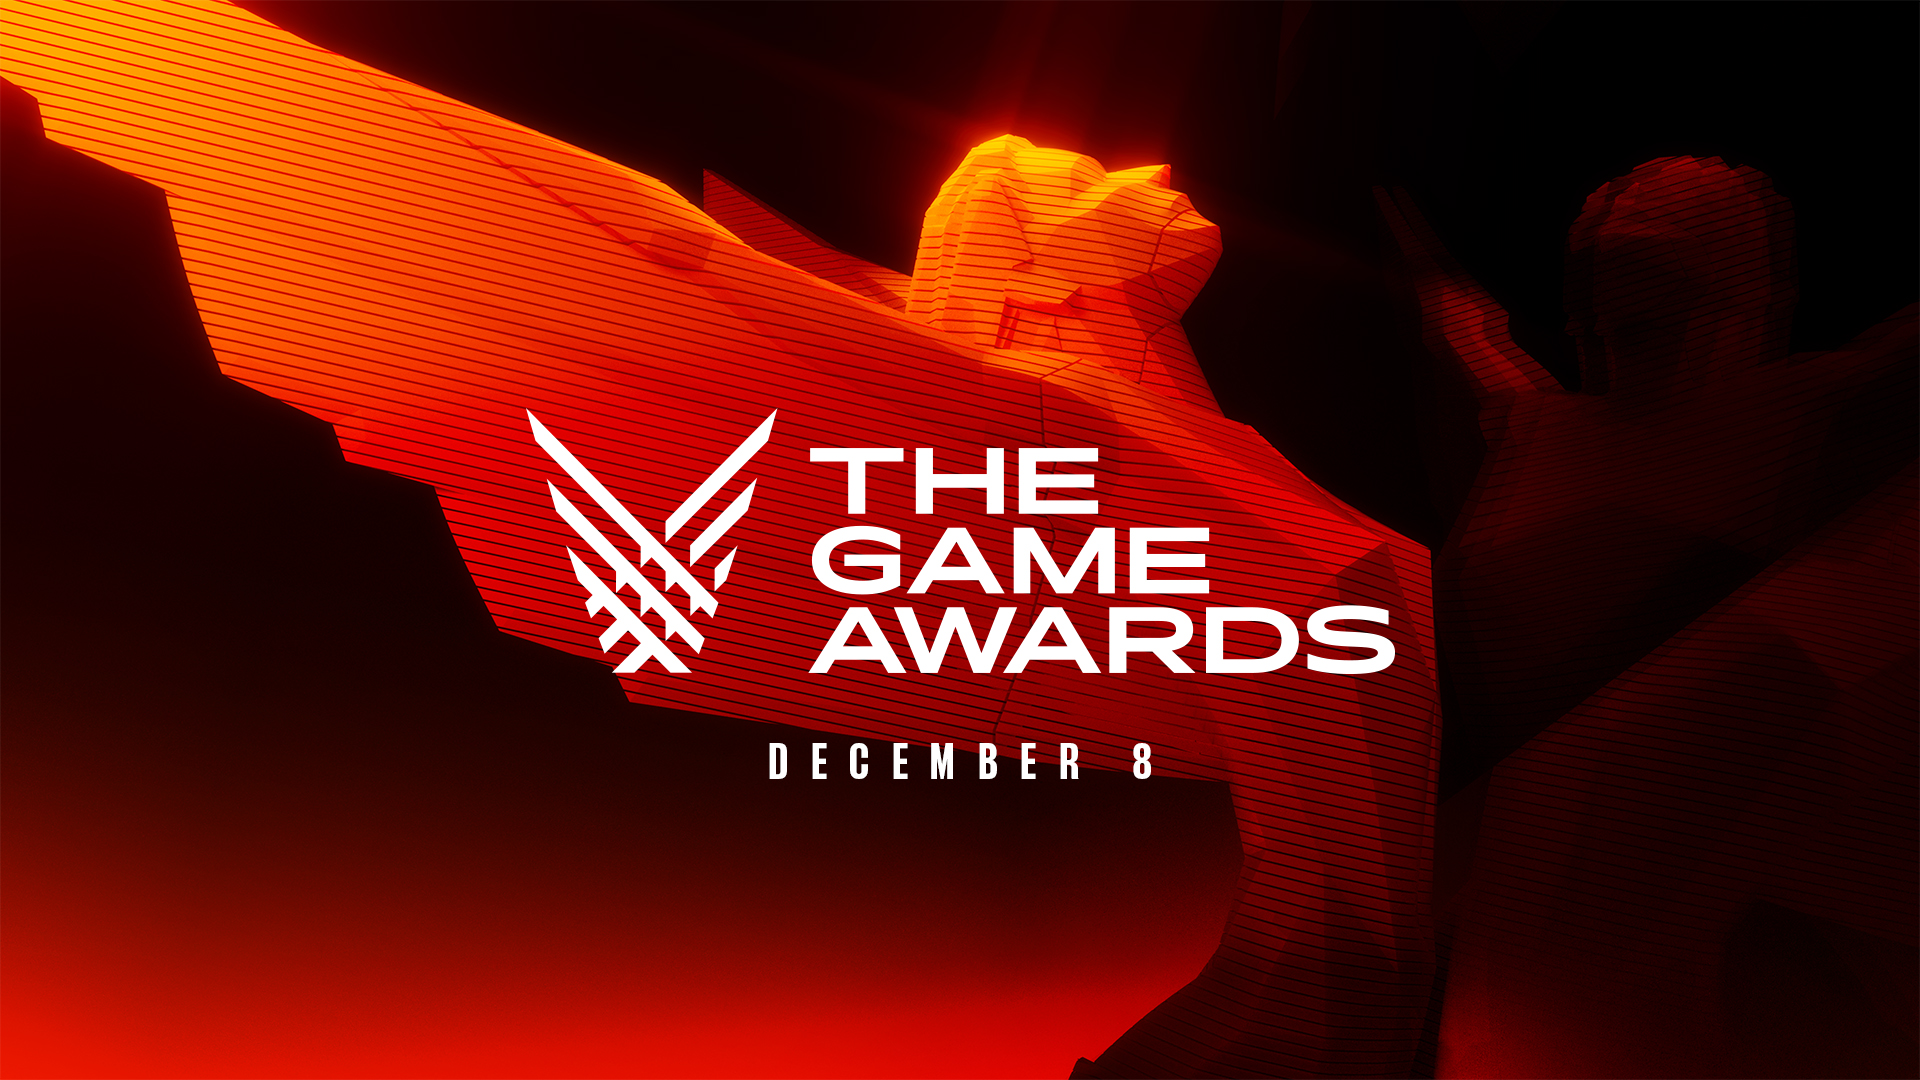 The Game Awards are rumored to feature James Bond and a Cyberpunk 2077 expansion